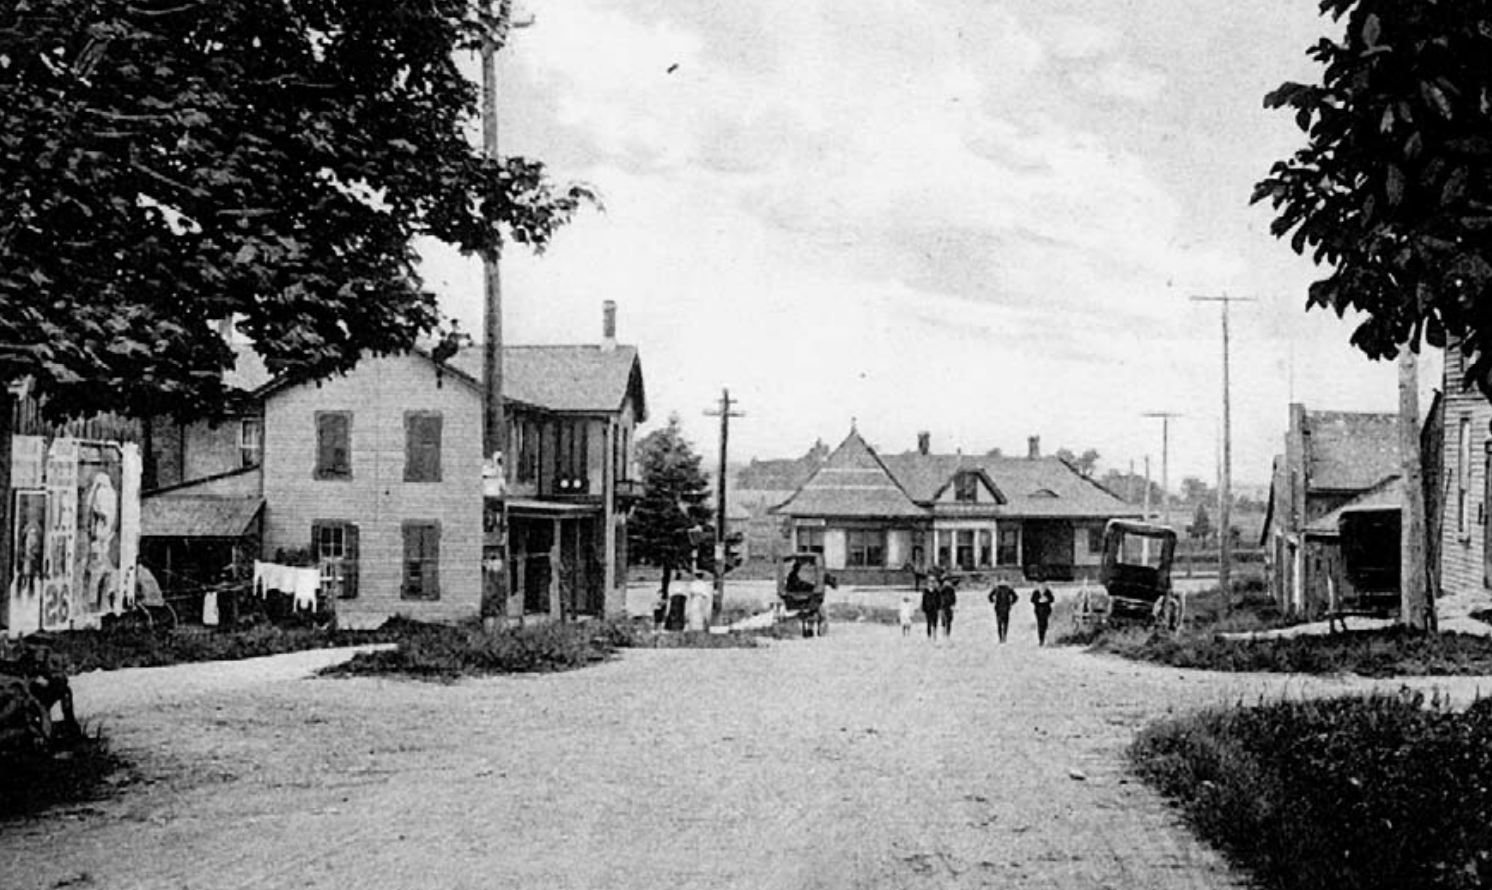 The train station seen looking north along Spruce Street